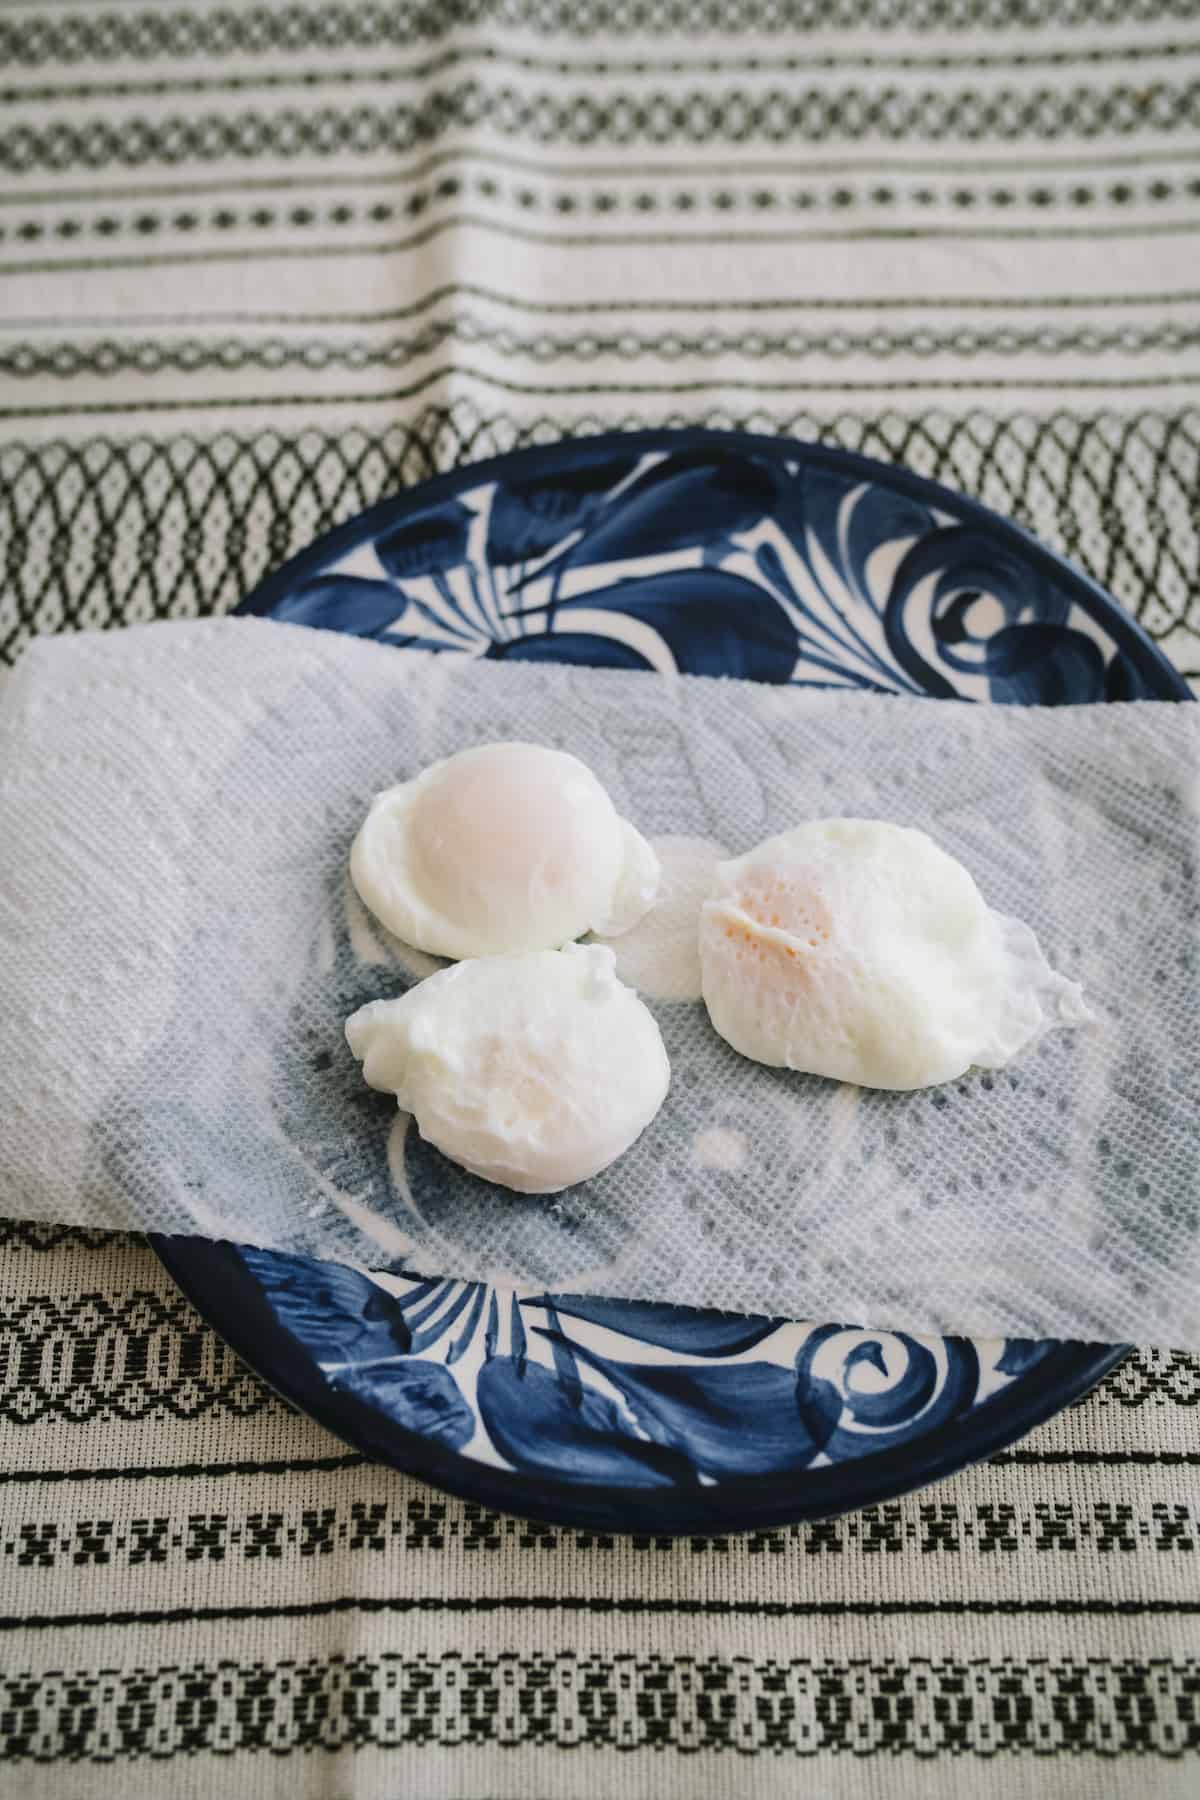 draining poached eggs on a paper towel.